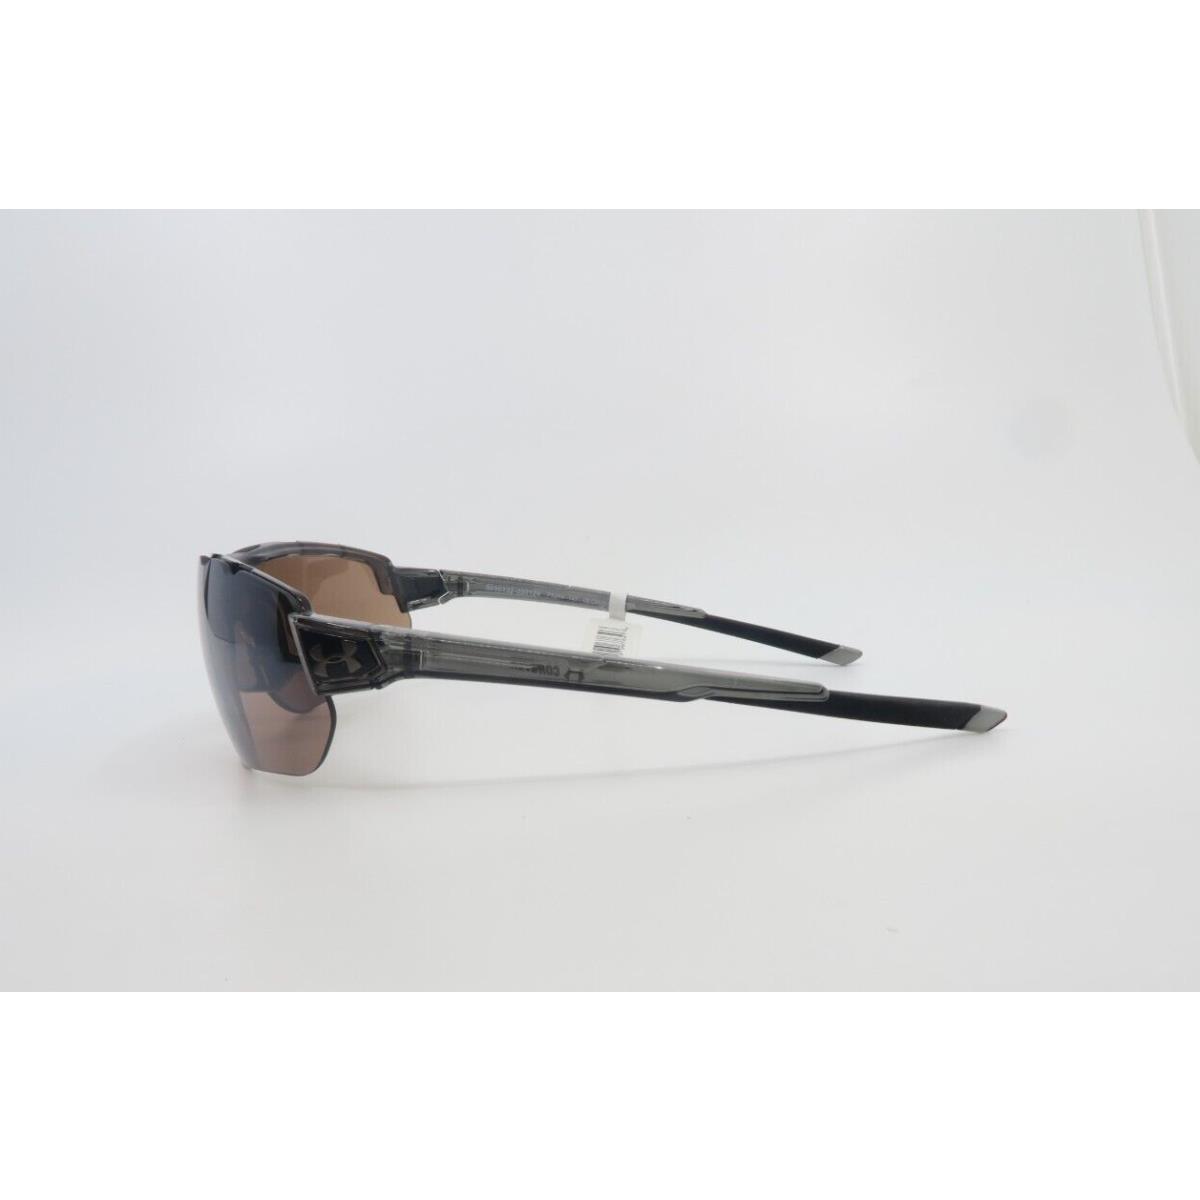 Under Armour sunglasses Tuned Road - Grey Frame, Smoke Brown Lens 6